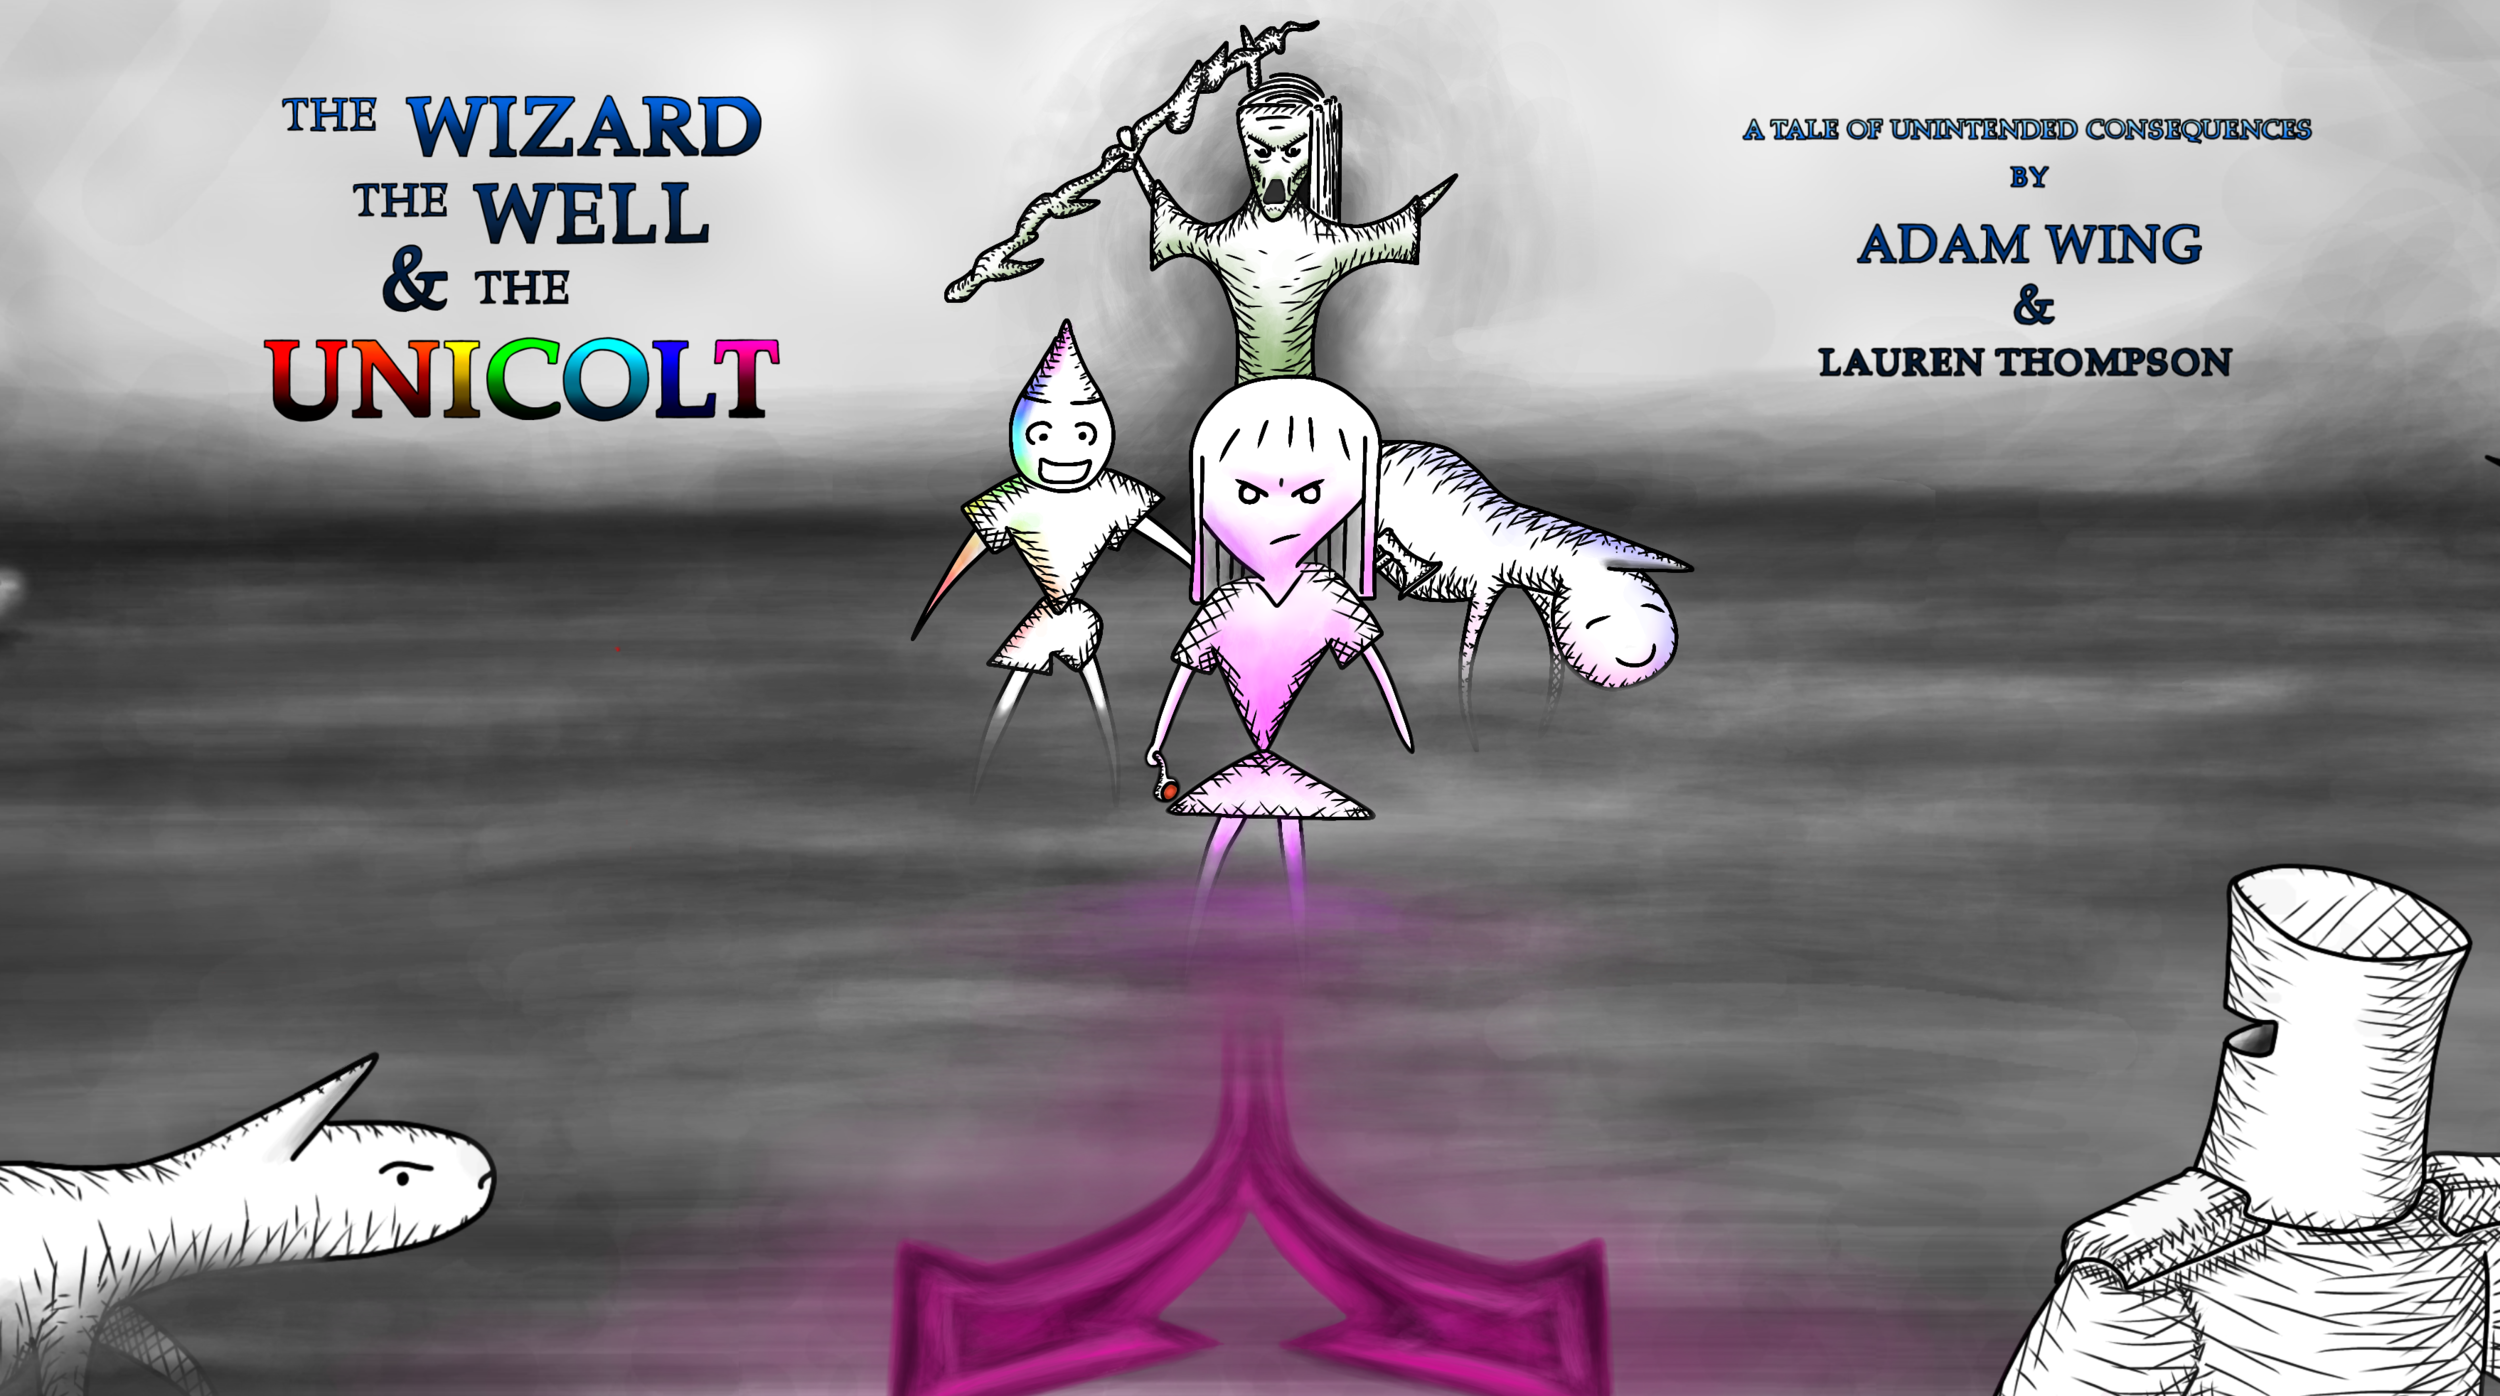 The Wizard, the Well & the Unicolt COVER 7A.png